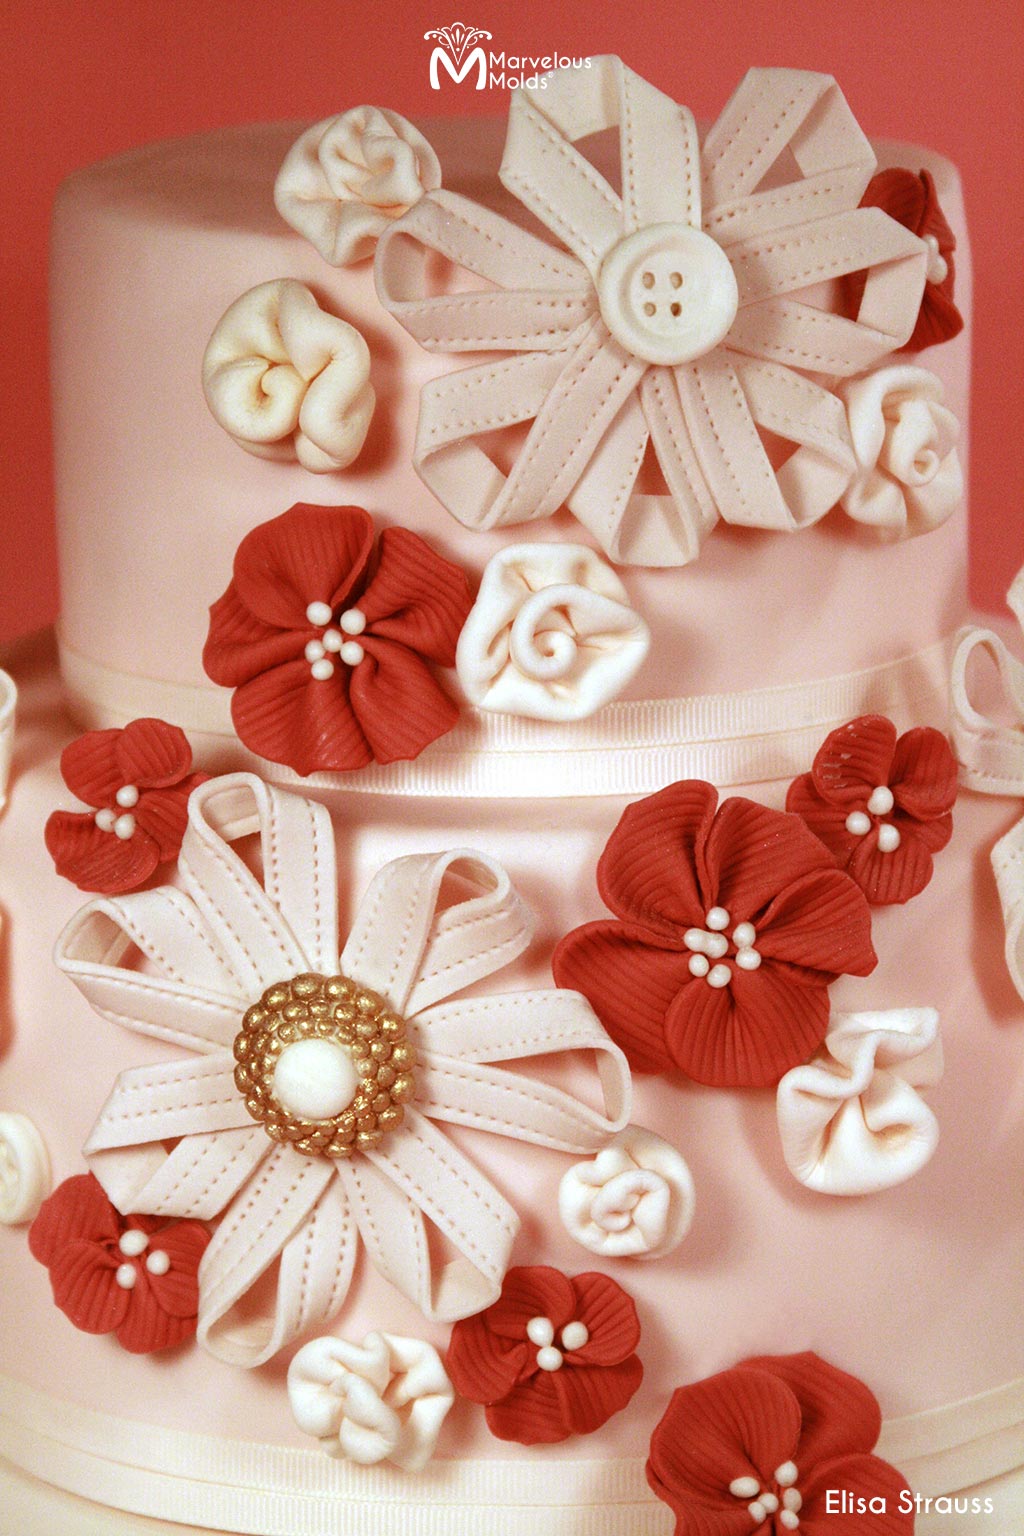 Pink and Red Floral Cake with Marvelous Molds Basic Buttons Mold